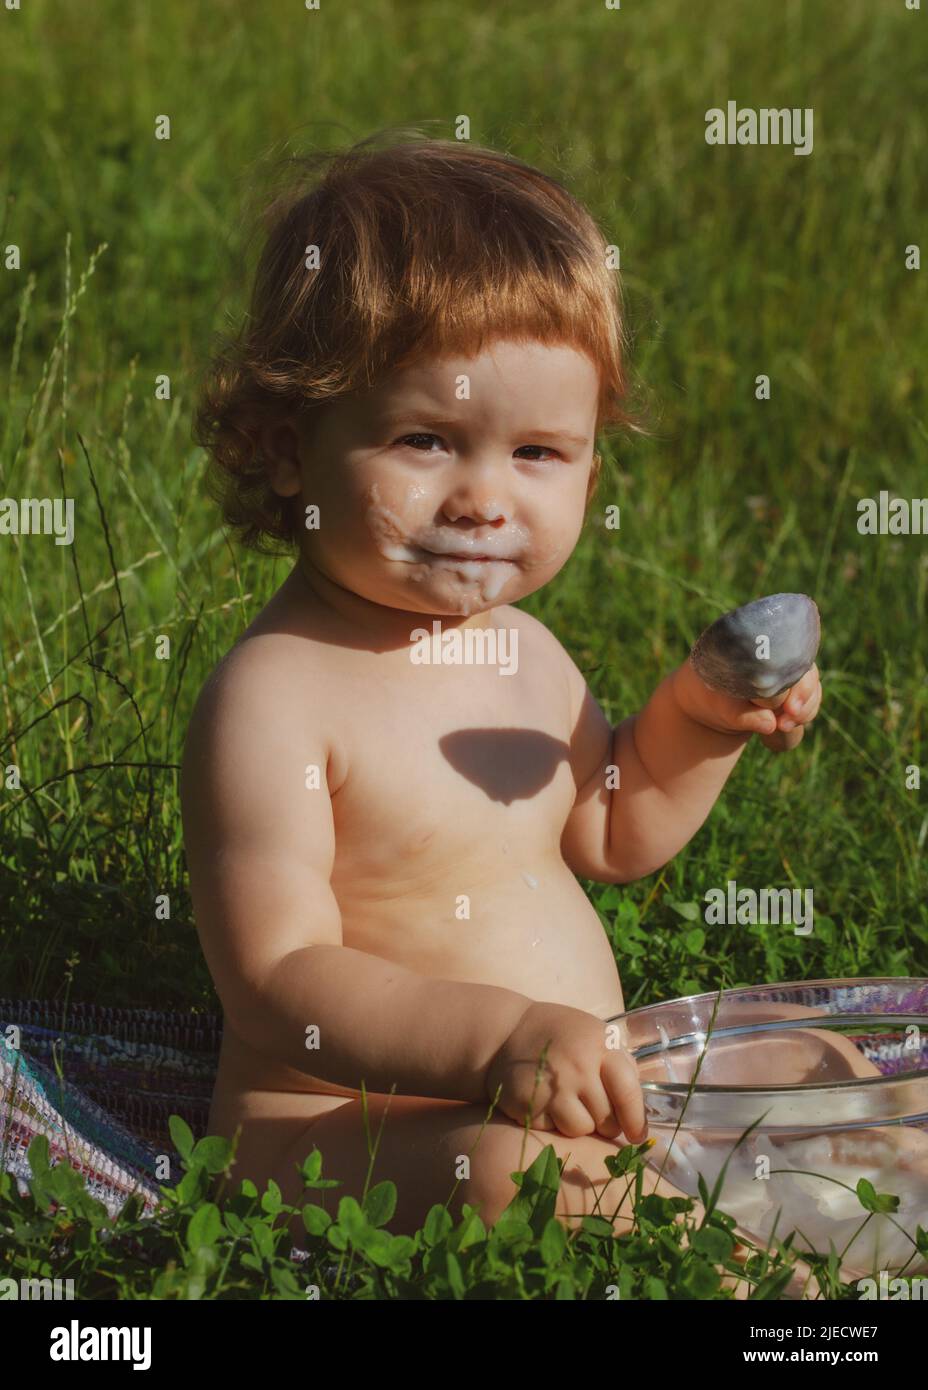 Cute toddler baby eating healthy food. Feeding with spoon. Funny child face. Stock Photo